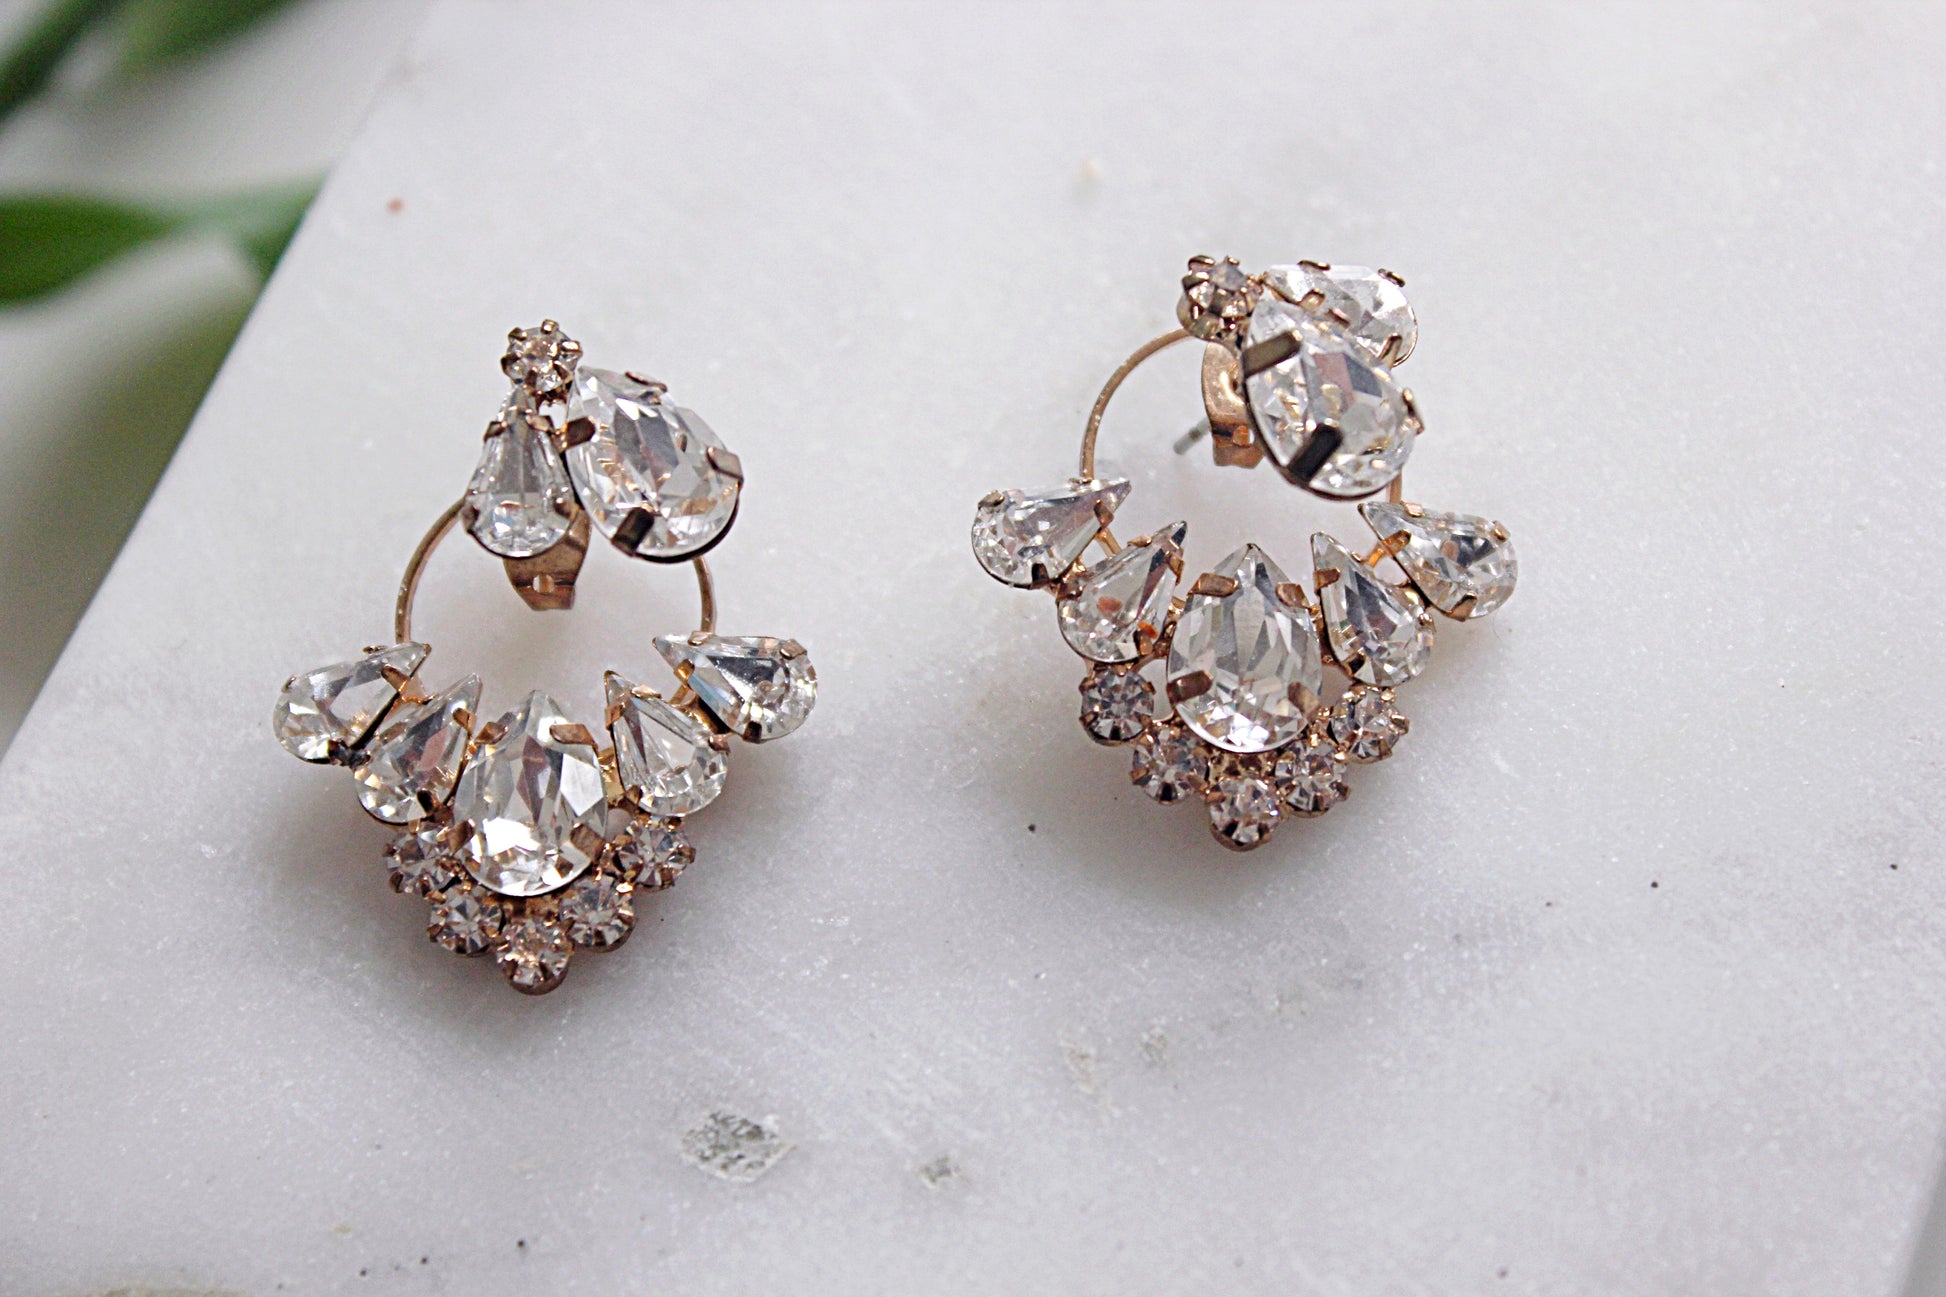 Crystal Ear Jacket Earrings Gold Ear Climber Rhinestone Cluster Earrings Art Deco Cubic Zirconia Jeweled Hoop Vintage Bridal Earrings, CERSI EARRINGS  for Her, for Bride, for Bridesmaid Gift, for Mother of the Bride, for Wedding Guest or Special Occasion by Camilla Christine Bridal Jewelry and Wedding Accessories. Bridal Style Inspiration Trends for Bride, Wedding Ideas